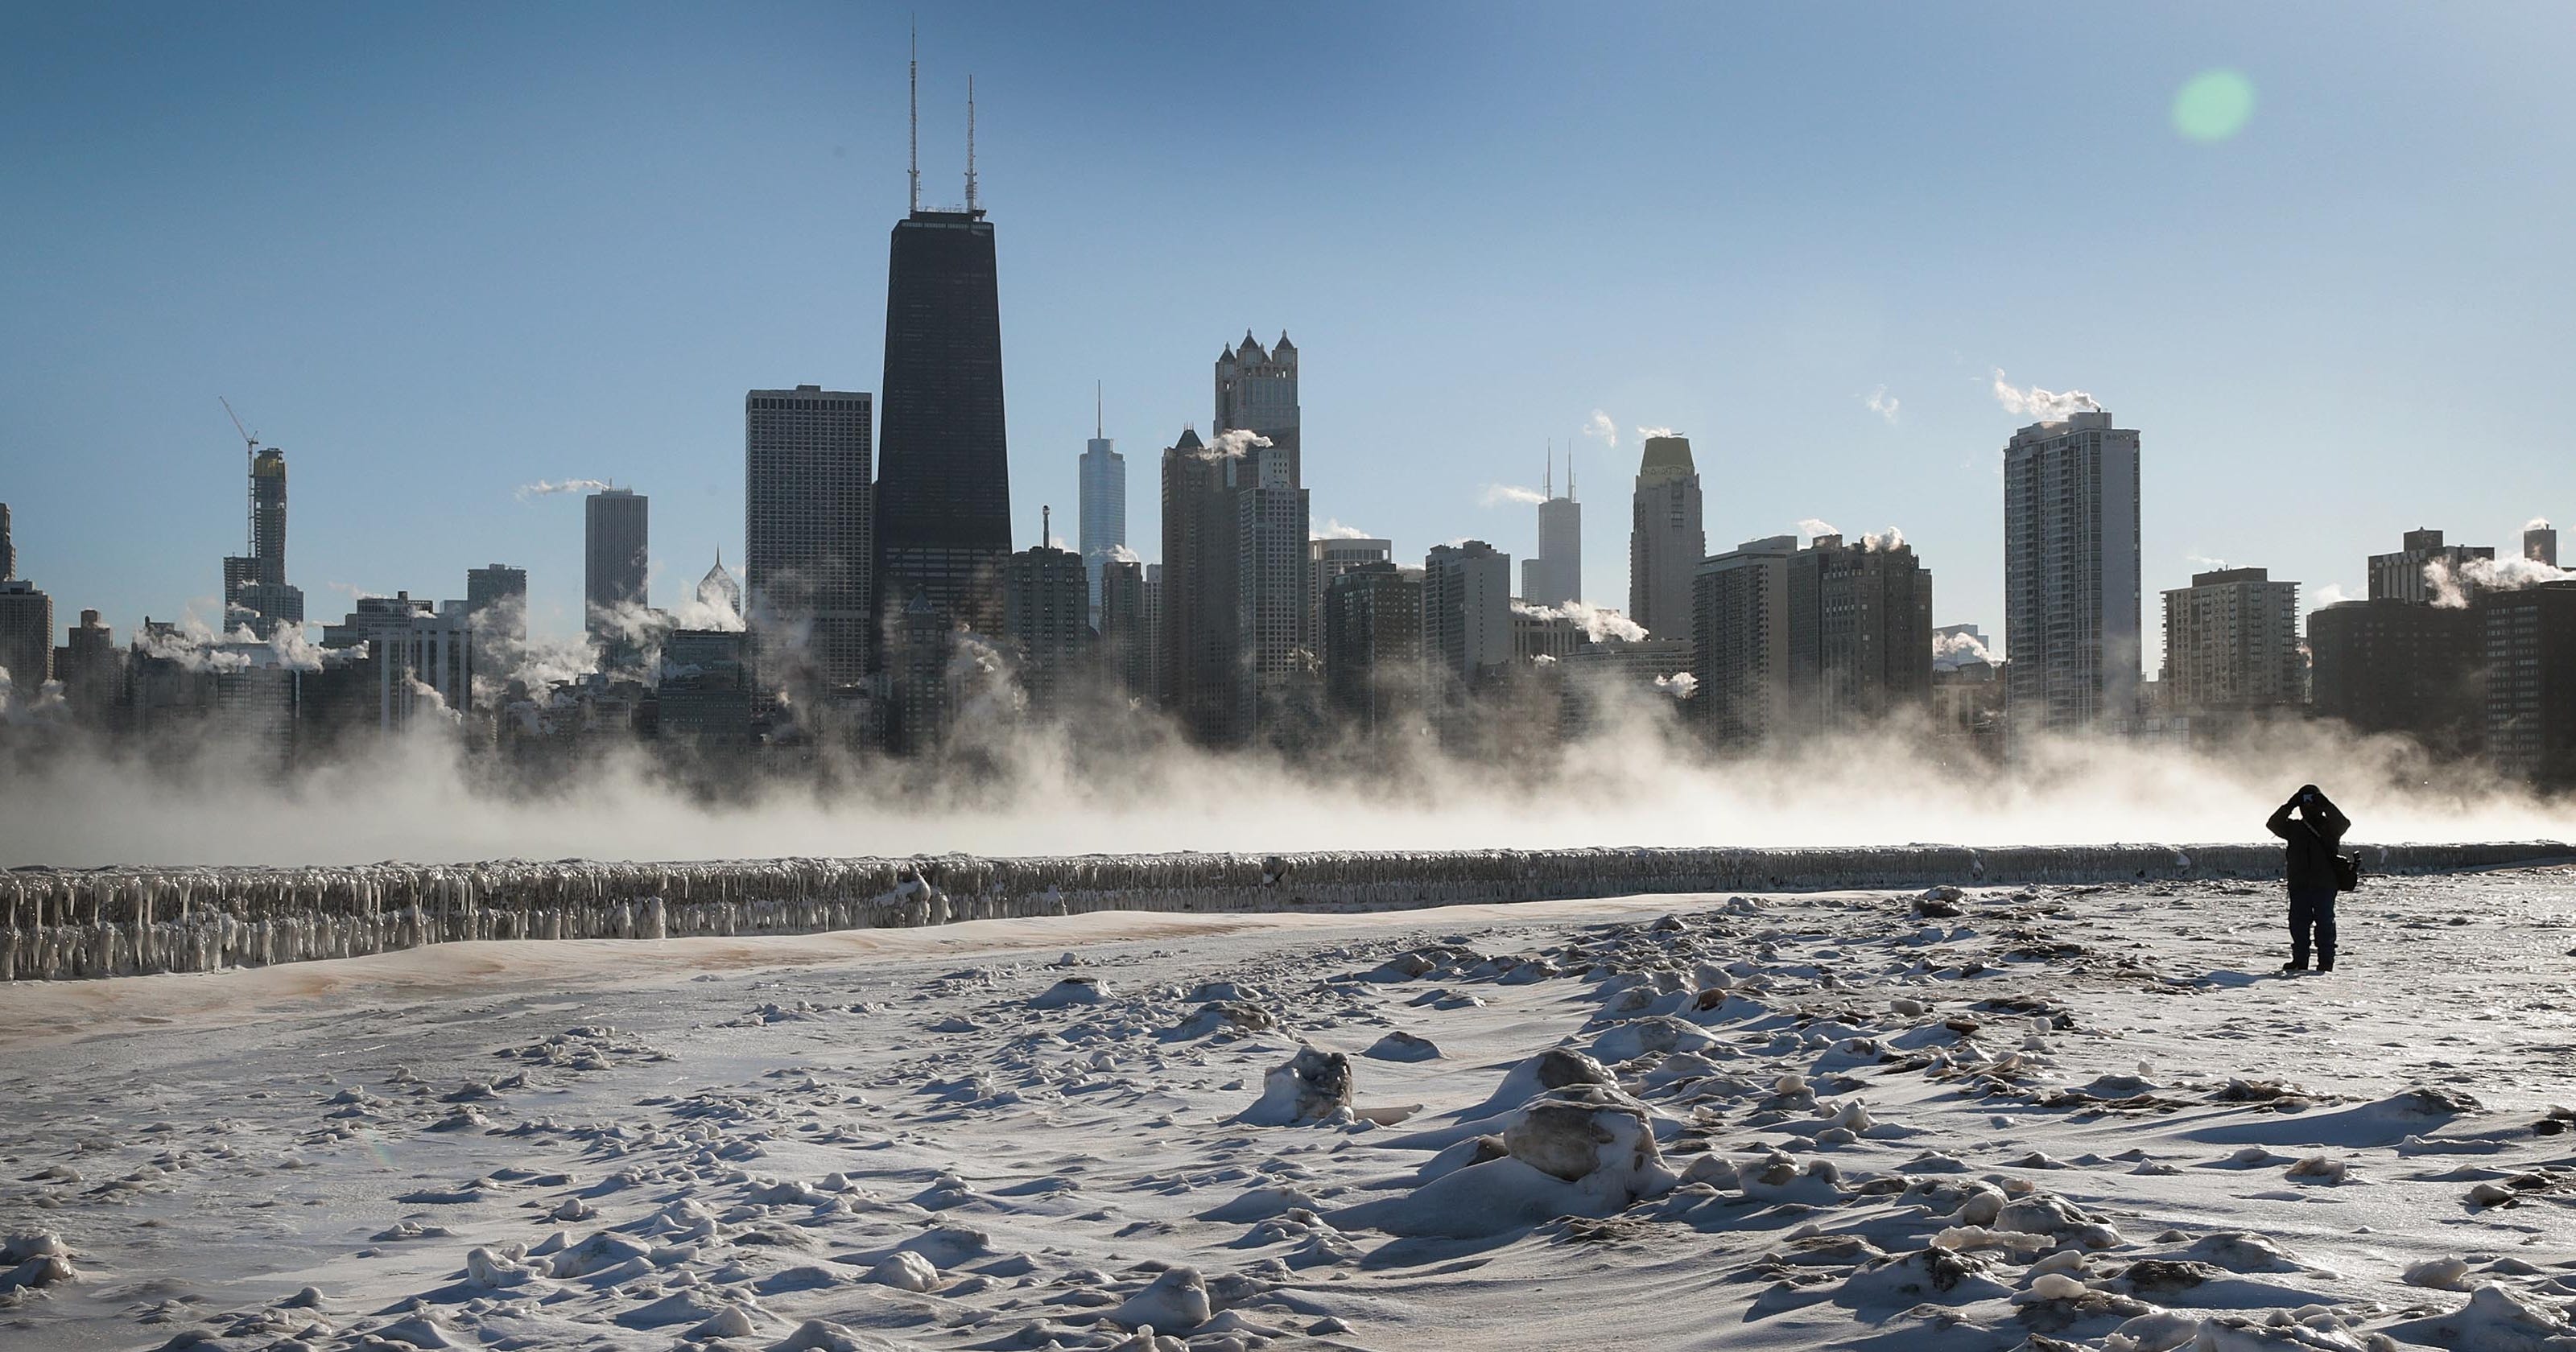 Cold winter weather in Chicago Some must brave dangerous freeze